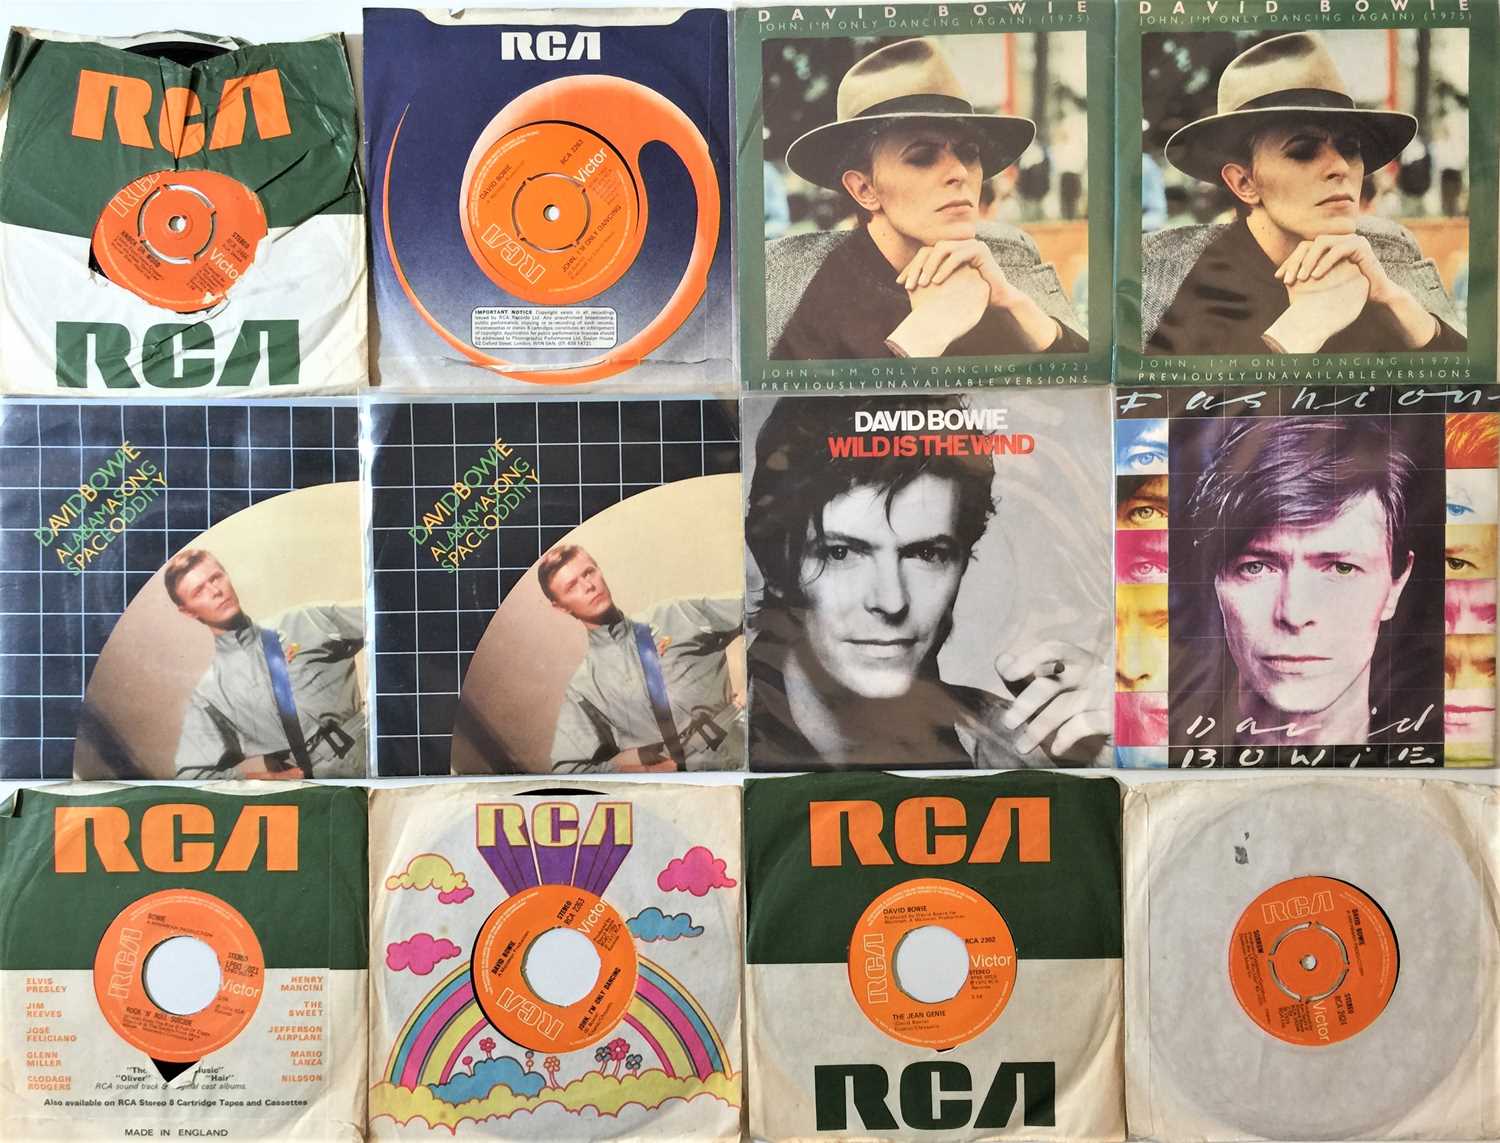 DAVID BOWIE - UK RCA 7" COLLECTION - Image 3 of 4